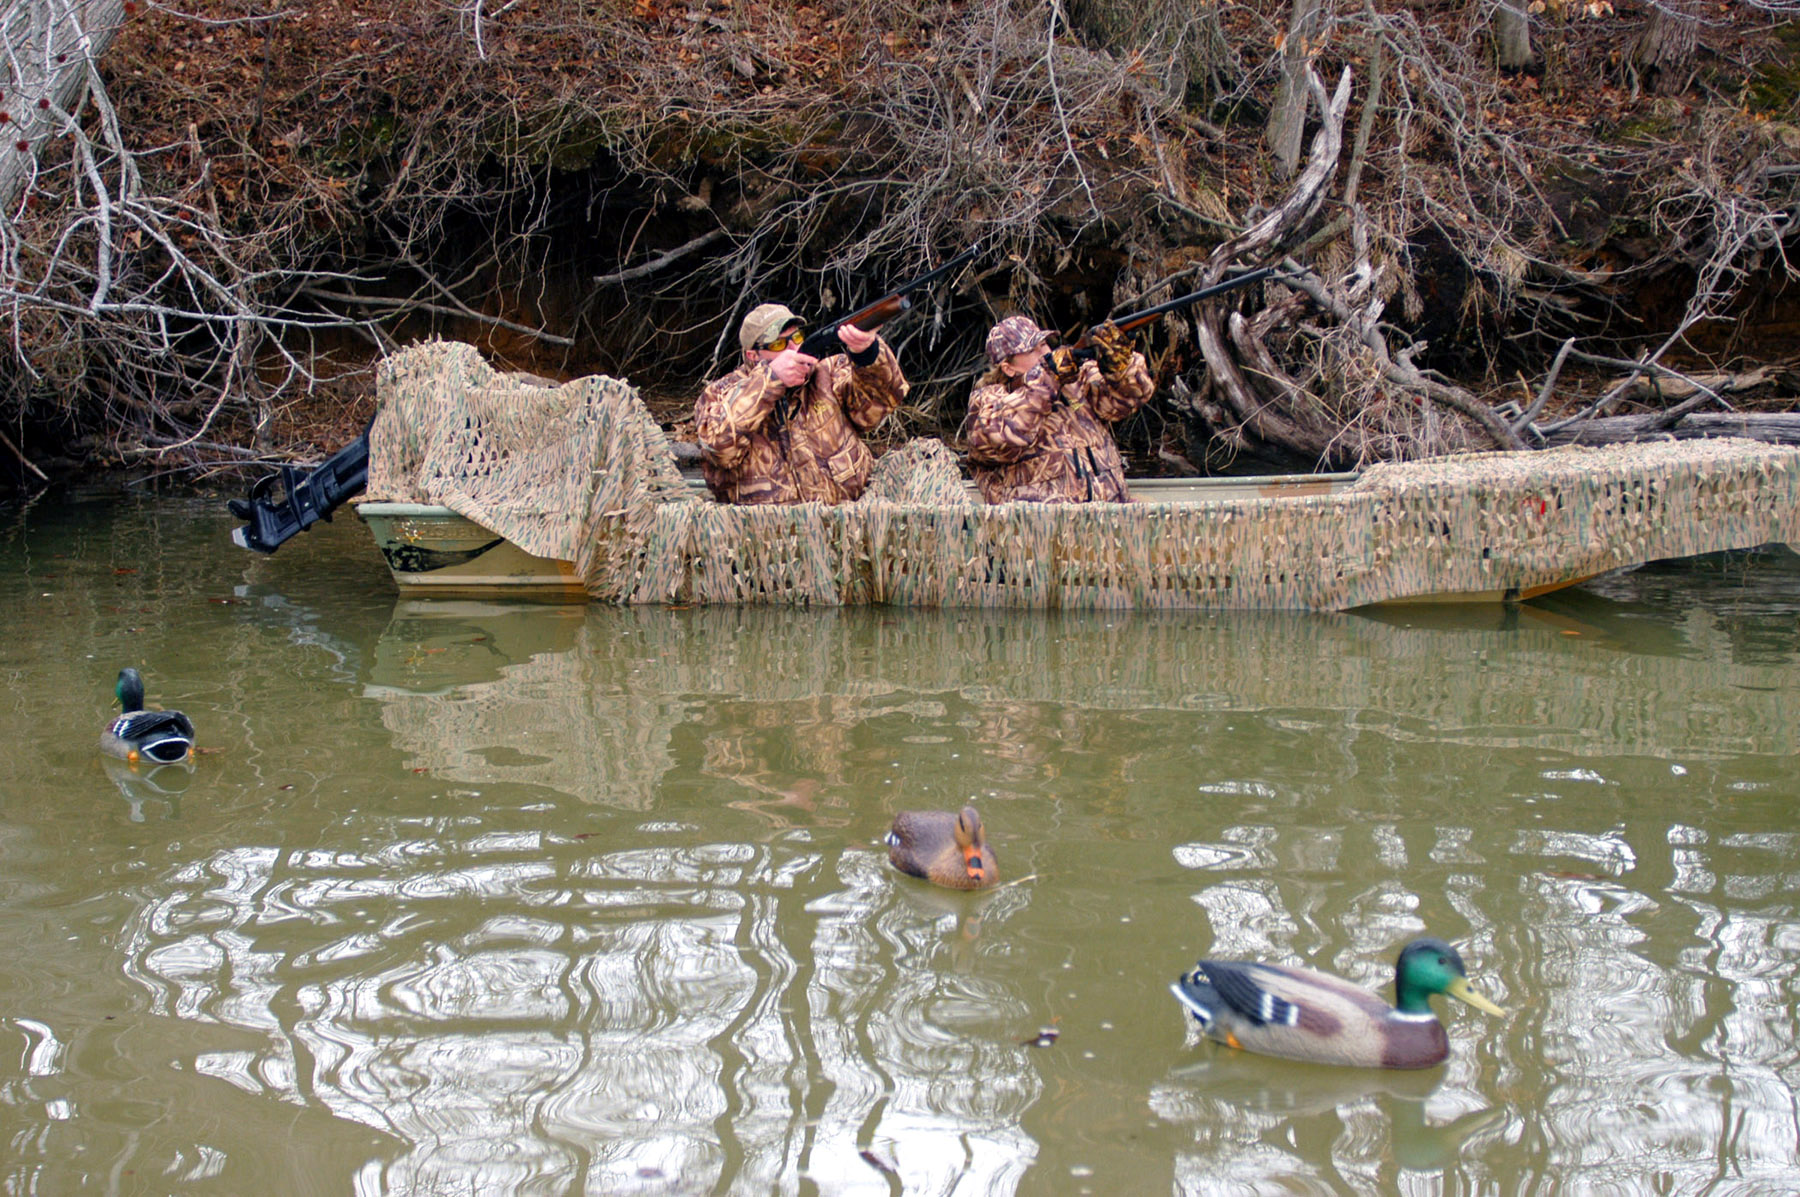 Duck Blind Plans For A Boat free stitch and glue boat building plans 